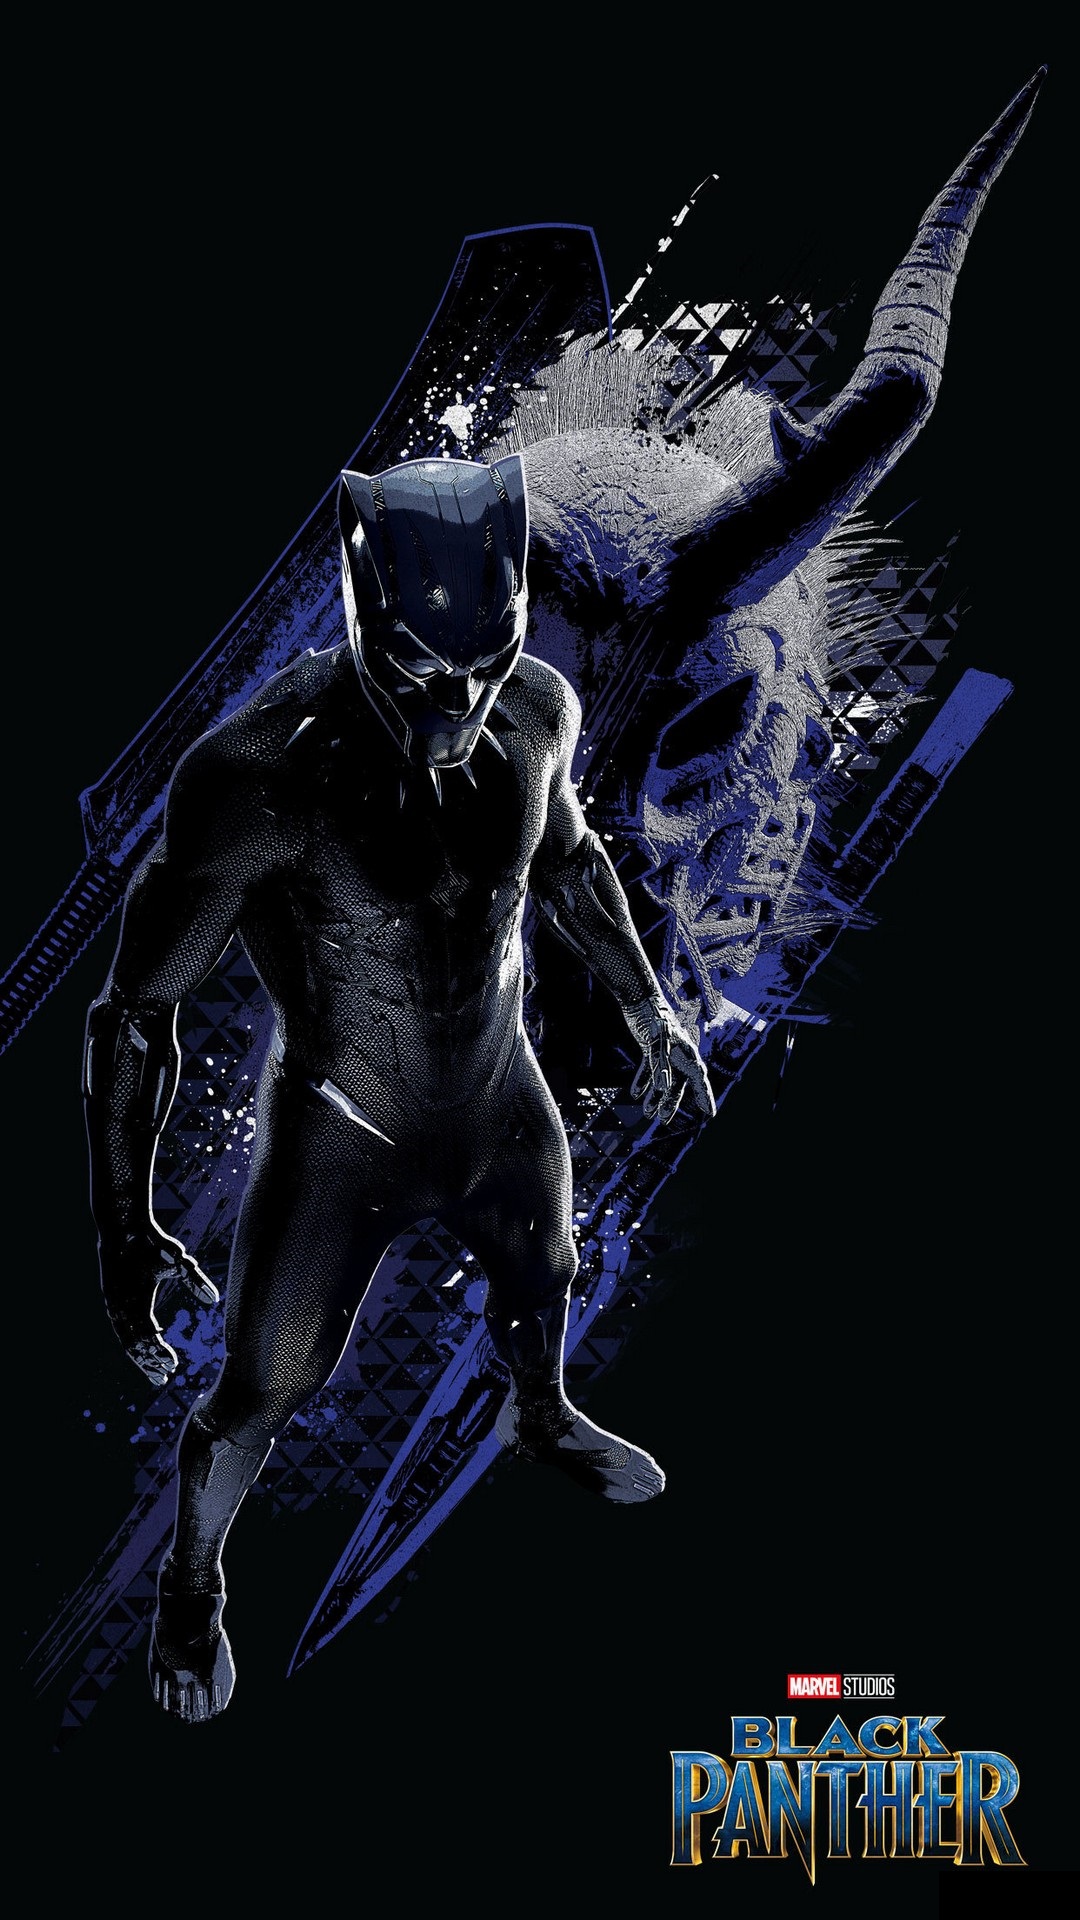 Wallpaper Black Panther Android With high-resolution 1080X1920 pixel. You can use this wallpaper for your Android backgrounds, Tablet, Samsung Screensavers, Mobile Phone Lock Screen and another Smartphones device